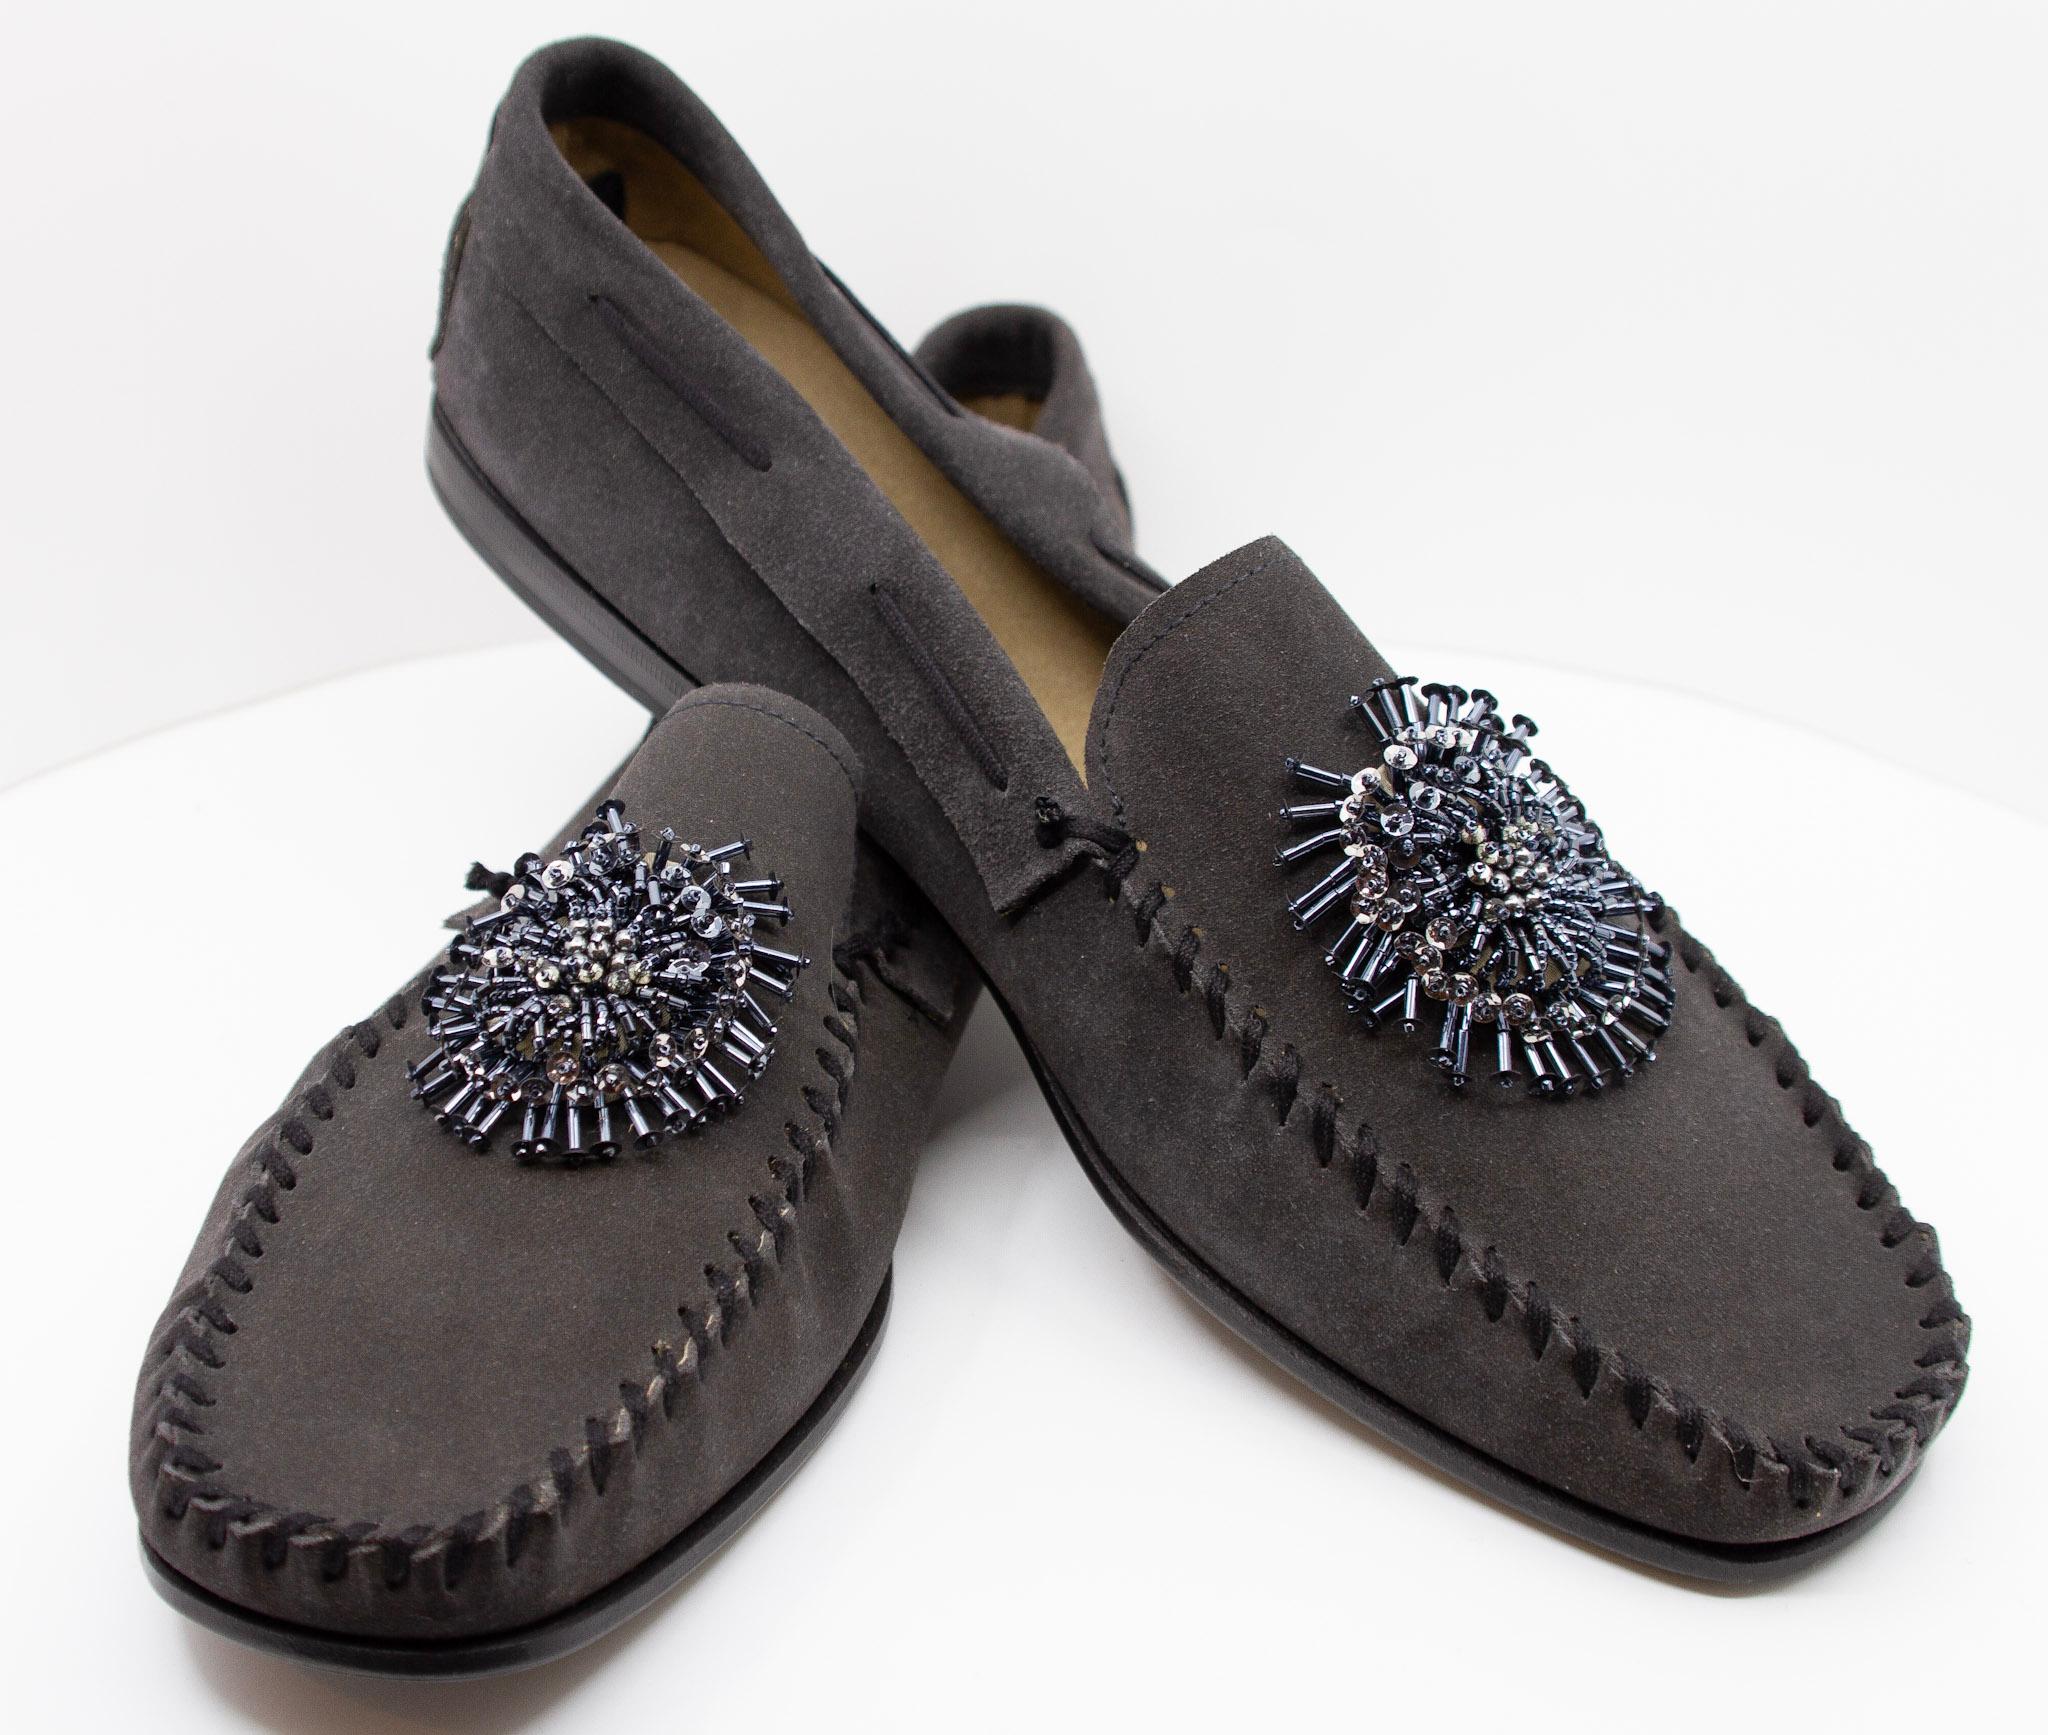 PRADA, charcoal, suede, loafers with beaded embellishments and leather soles, Estate of André Leon Talley.

New condition.

Given to André Leon Talley by Prada, never worn.

Size 14